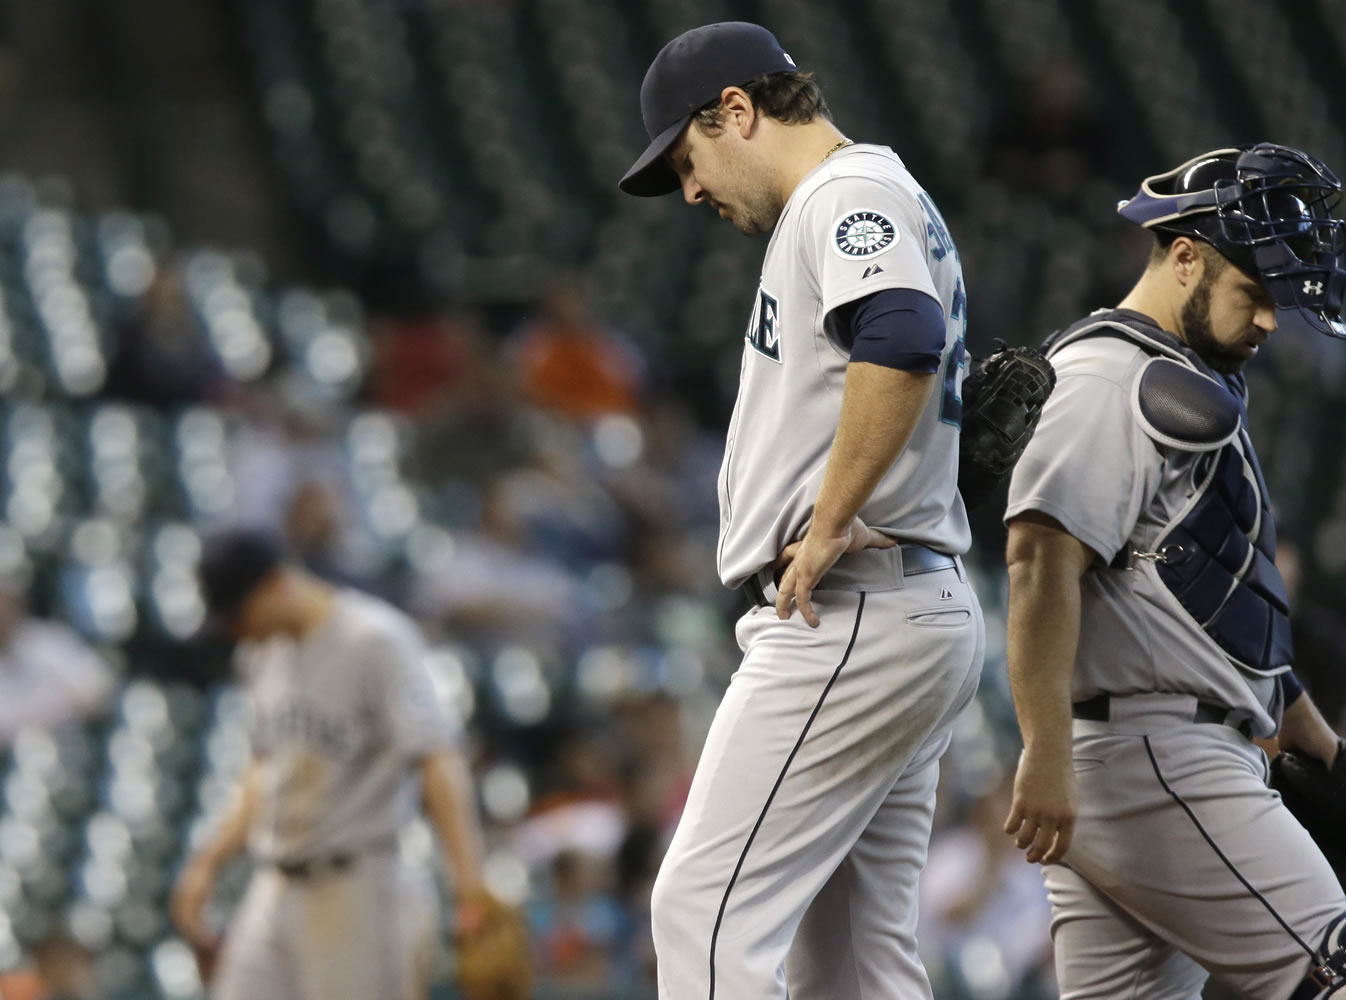 It was that kind of day for Seattle starting pitcher Joe Saunders, left, catcher Kelly Shoppach and the Mariners.